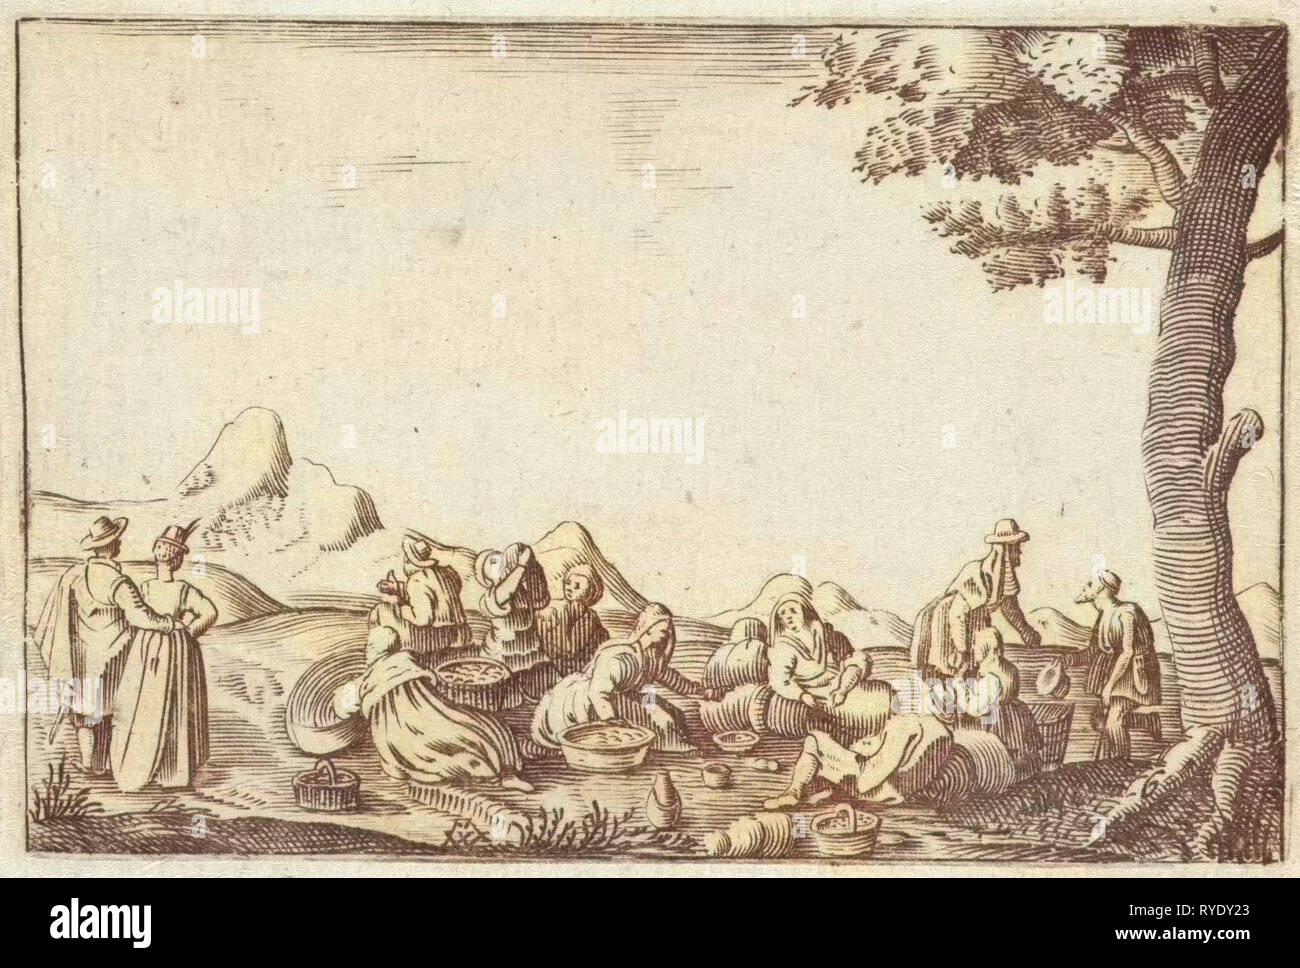 Men and women sit in a landscape with some baskets, They eat and drink, Left a couple right beside the tree a beggar, print maker: Monogrammist MW (graveur) (mentioned on object), Dating 1600 - 1700 Stock Photo